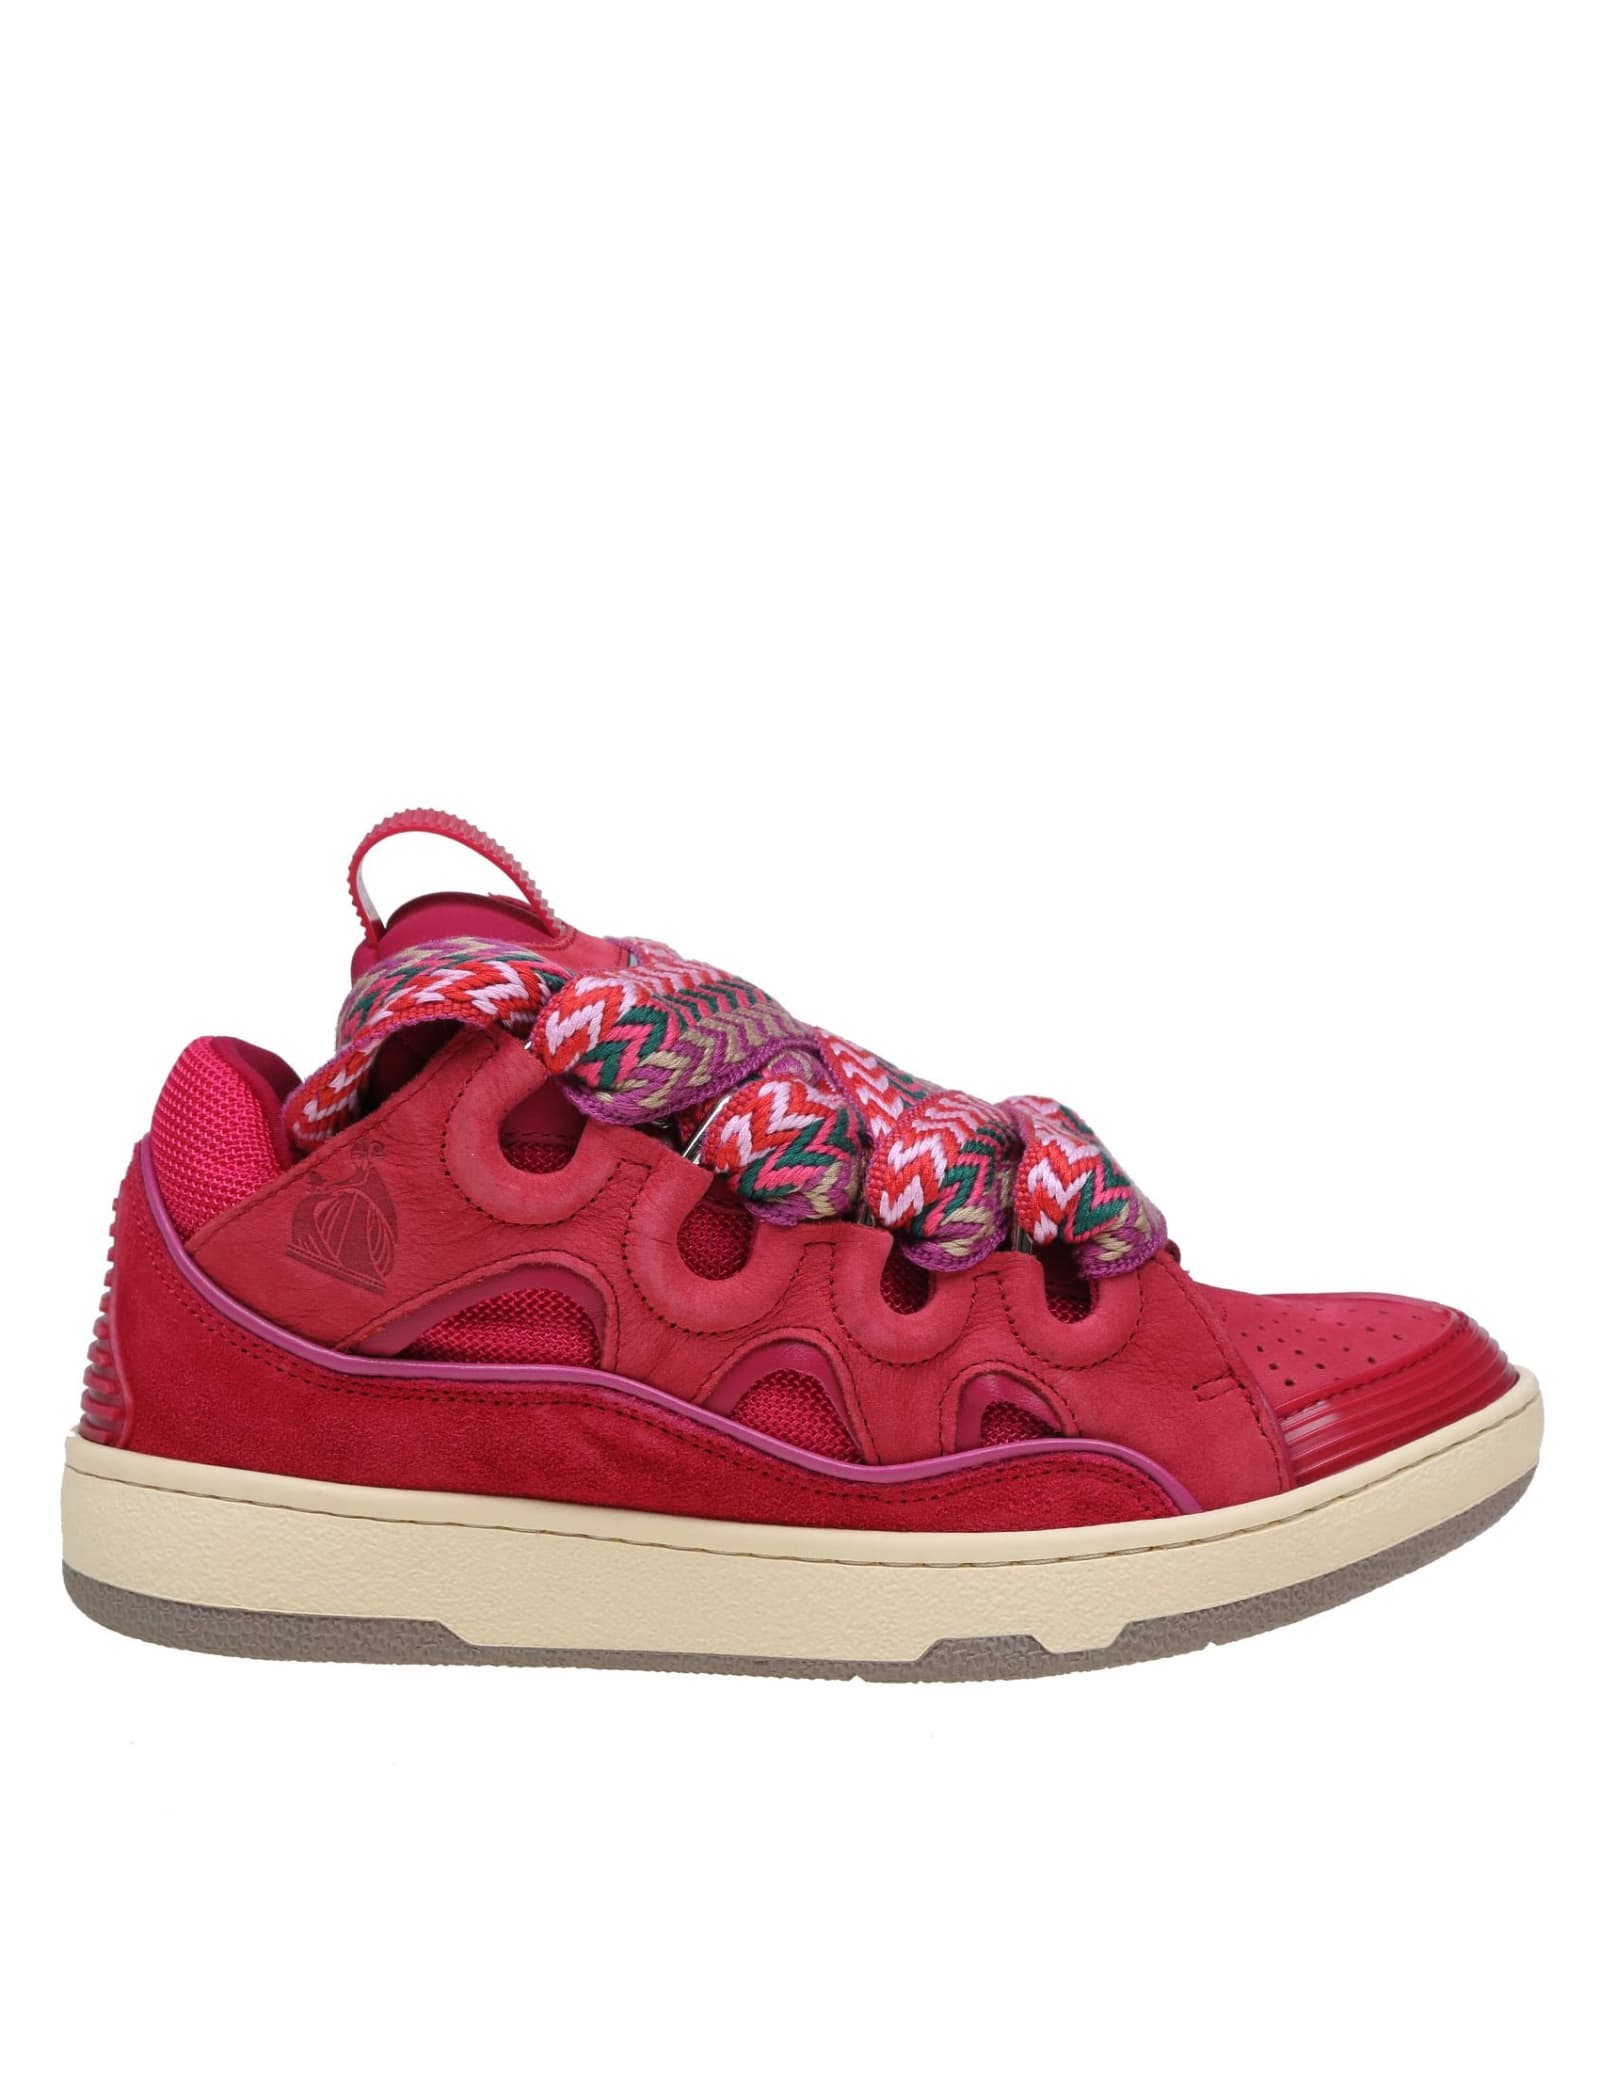 Shop Lanvin Curb Sneakers In Suede And Watermelon Color Fabric